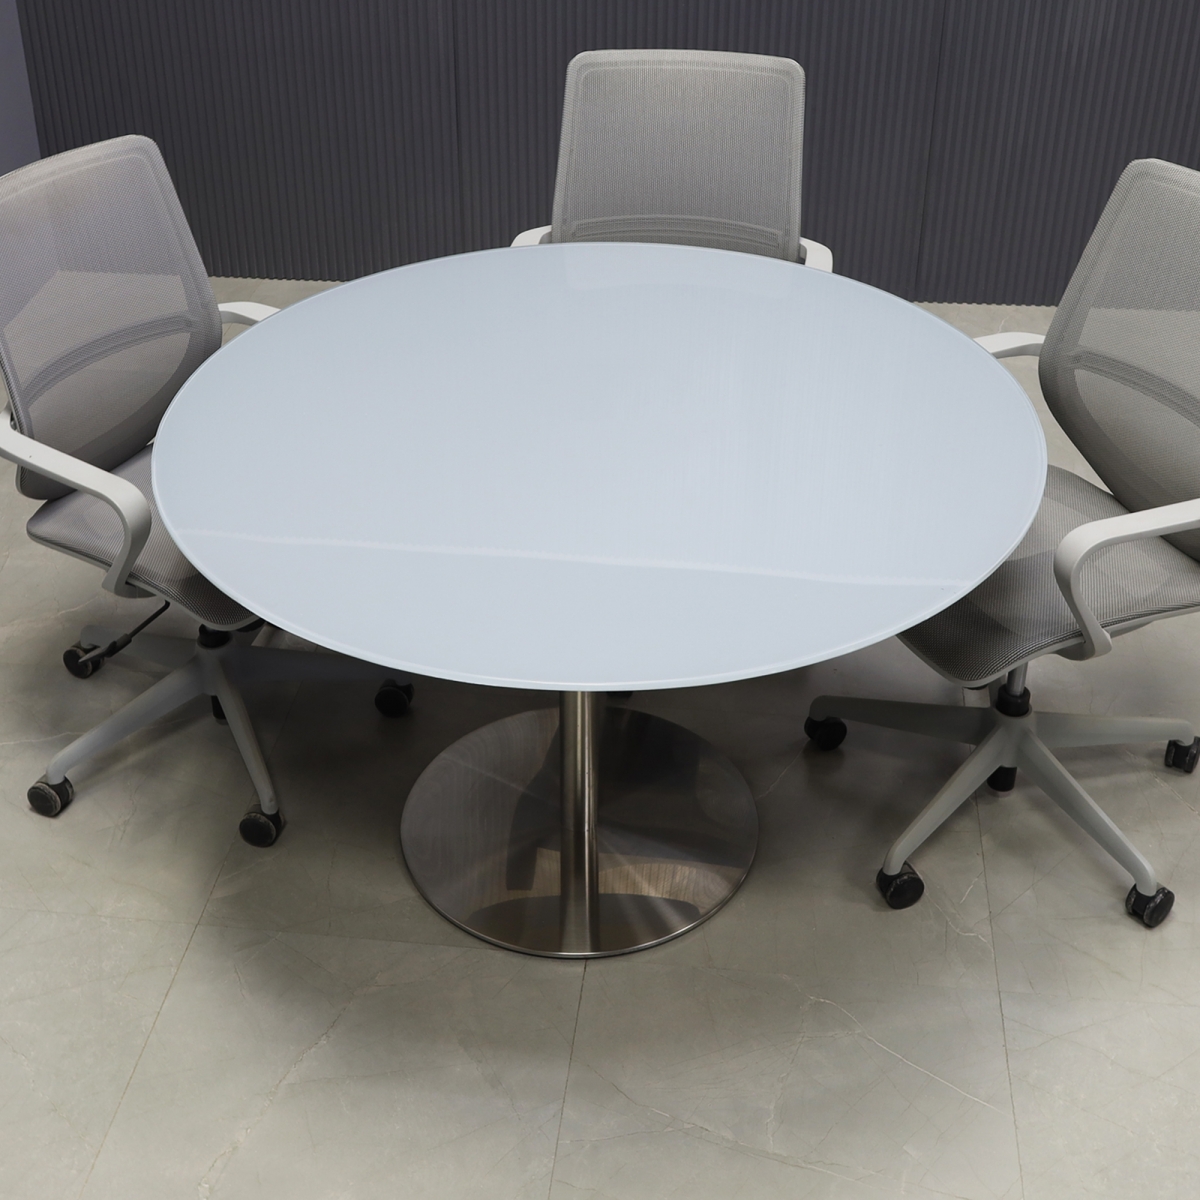 California Round Tempered Glass Cafeteria Table